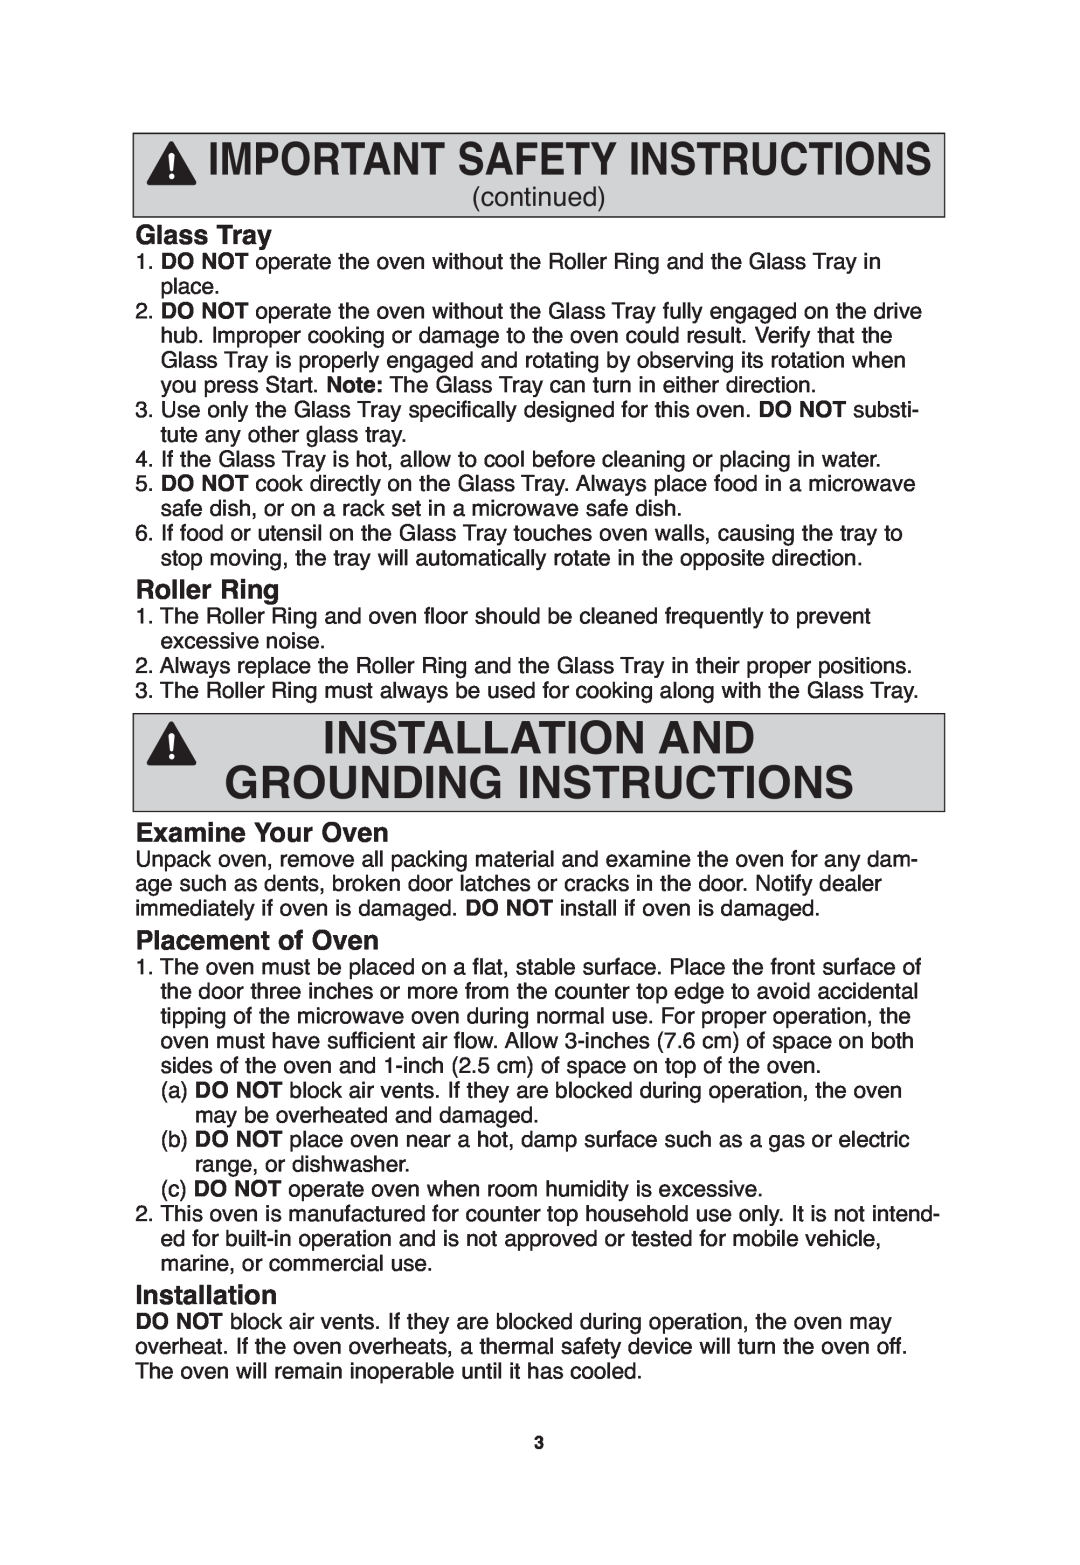 Panasonic NN-SA646 Installation And Grounding Instructions, Glass Tray, Roller Ring, Examine Your Oven, Placement of Oven 